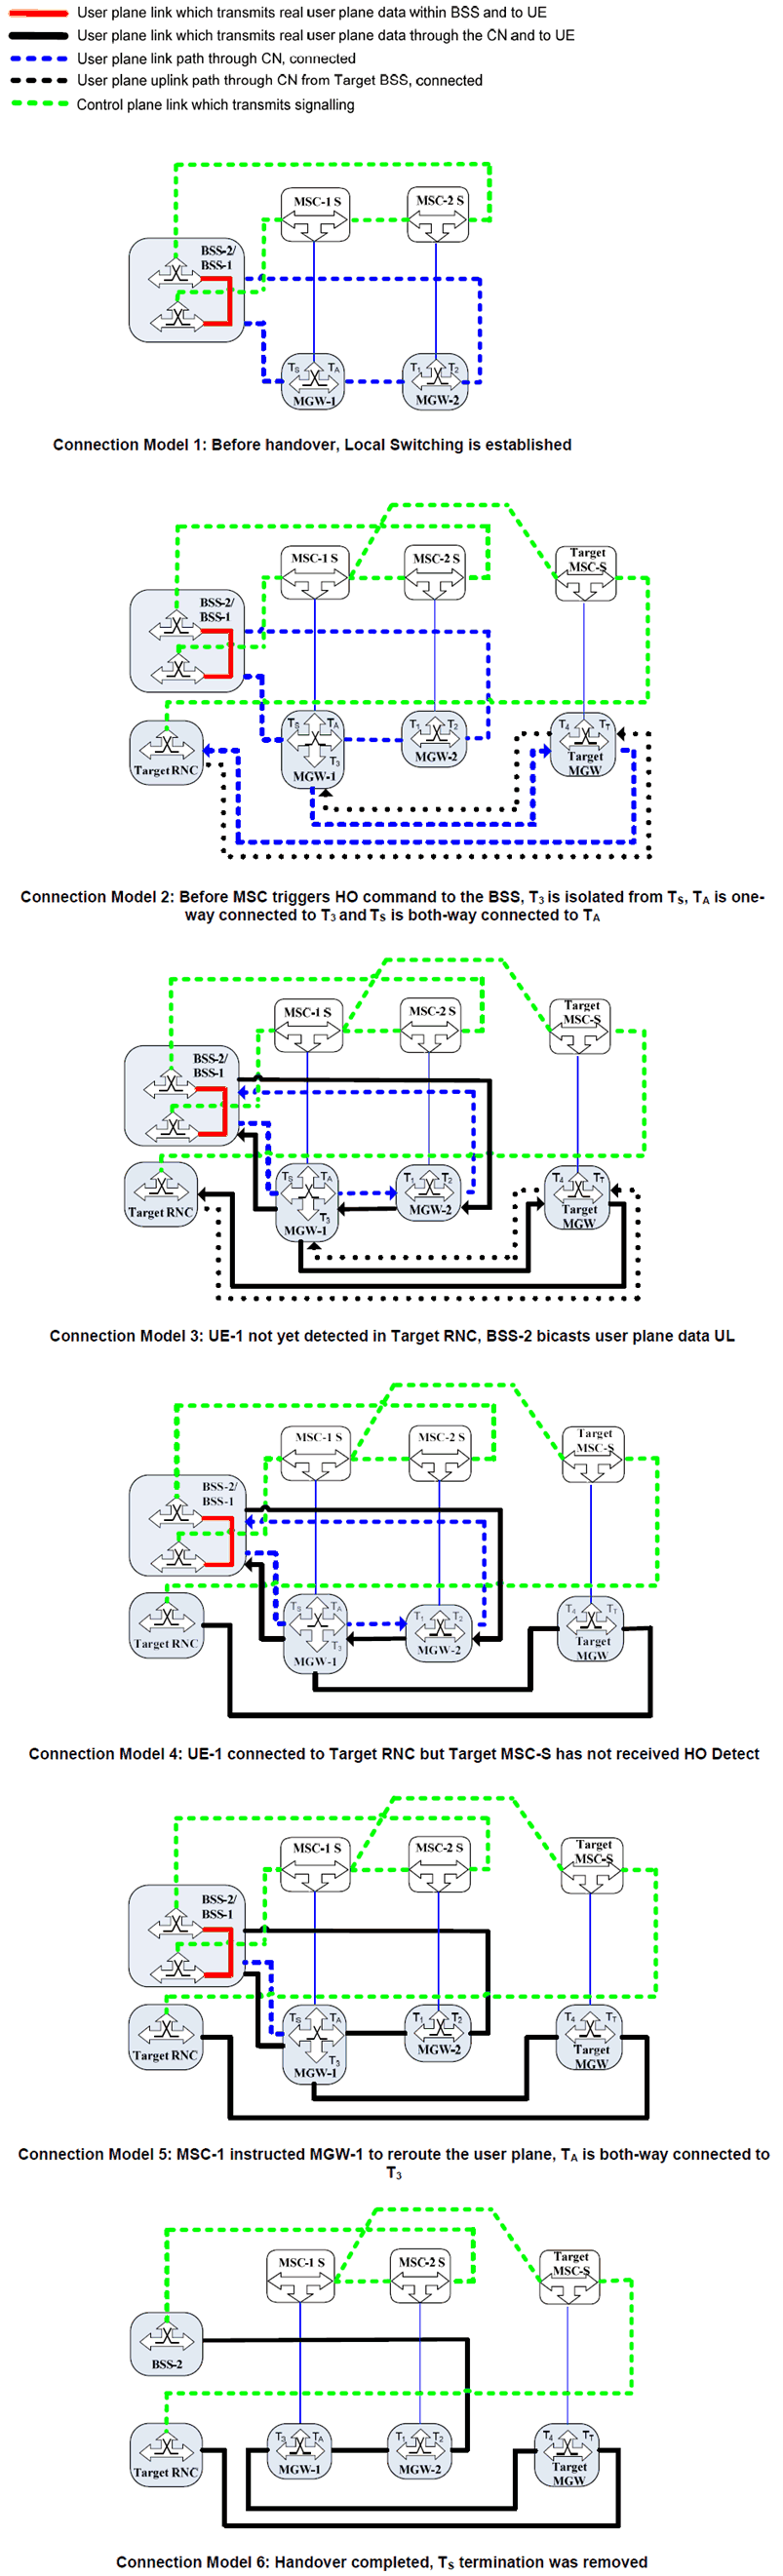 Copy of original 3GPP image for 3GPP TS 23.284, Fig. 8.3.2.4.1.1: Inter-MSC GSM to UMTS Relocation Connection Model when user plane active